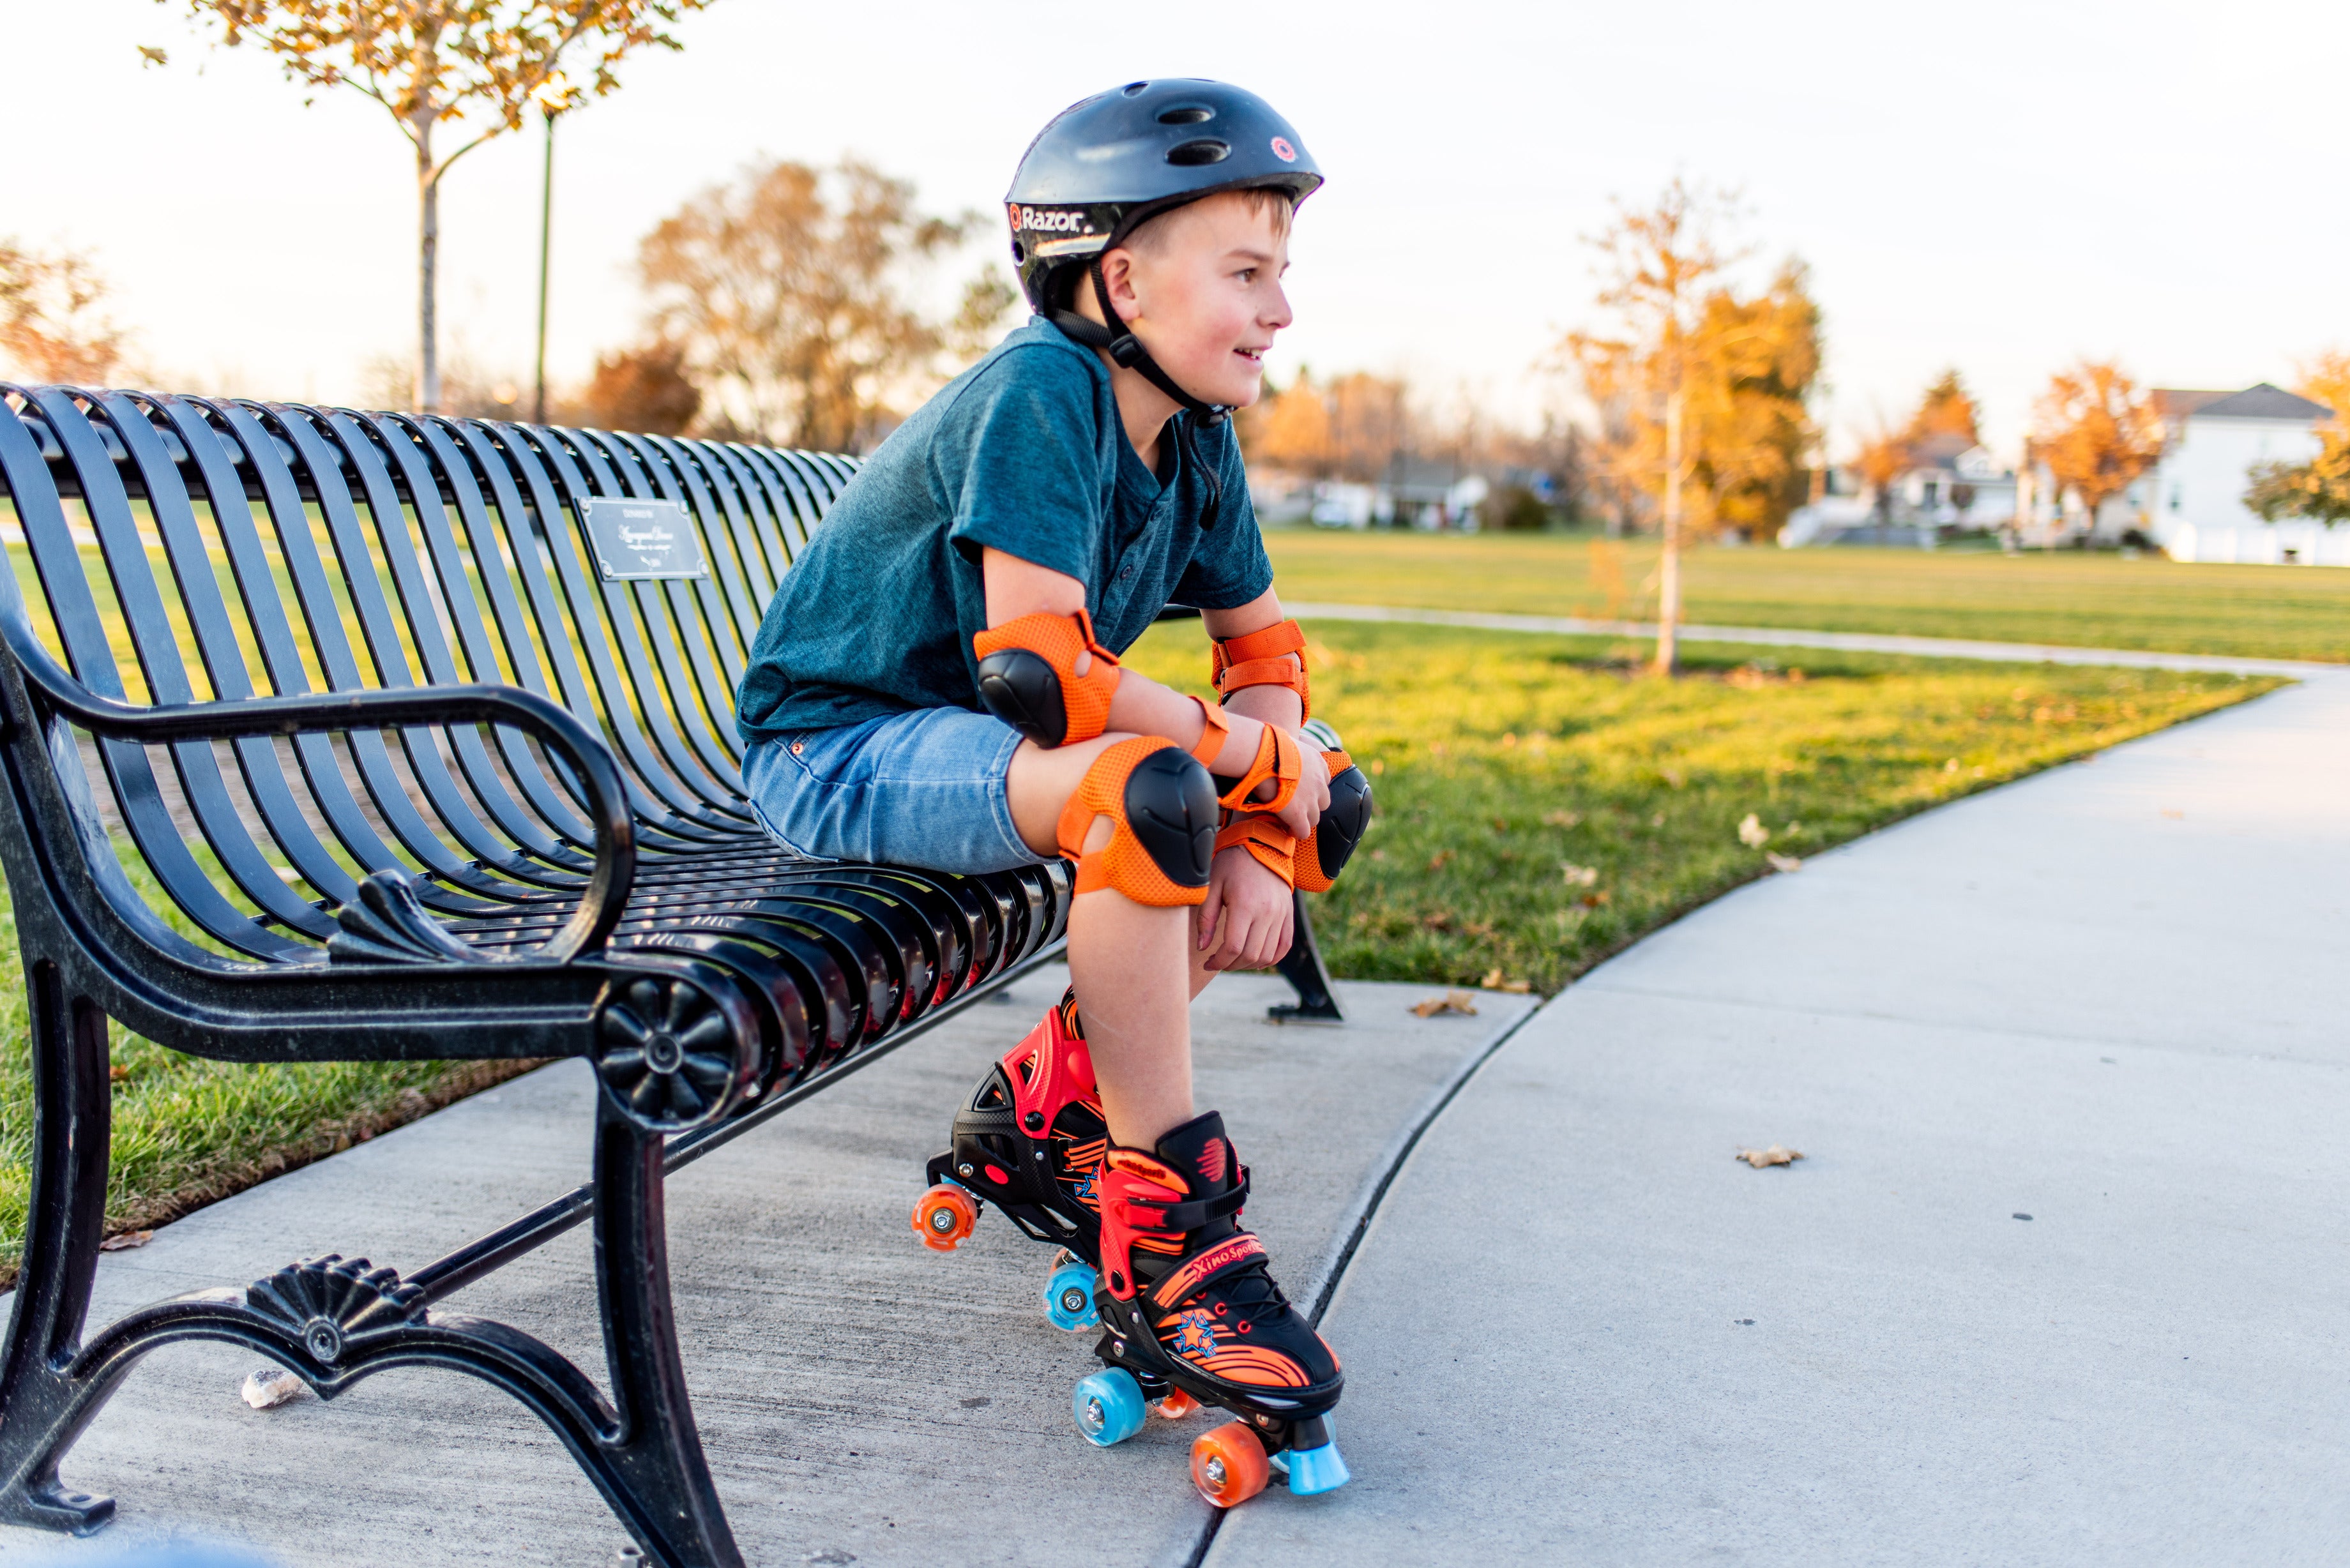 Combo adjustable roller skates for boys and girls - Xino Sports